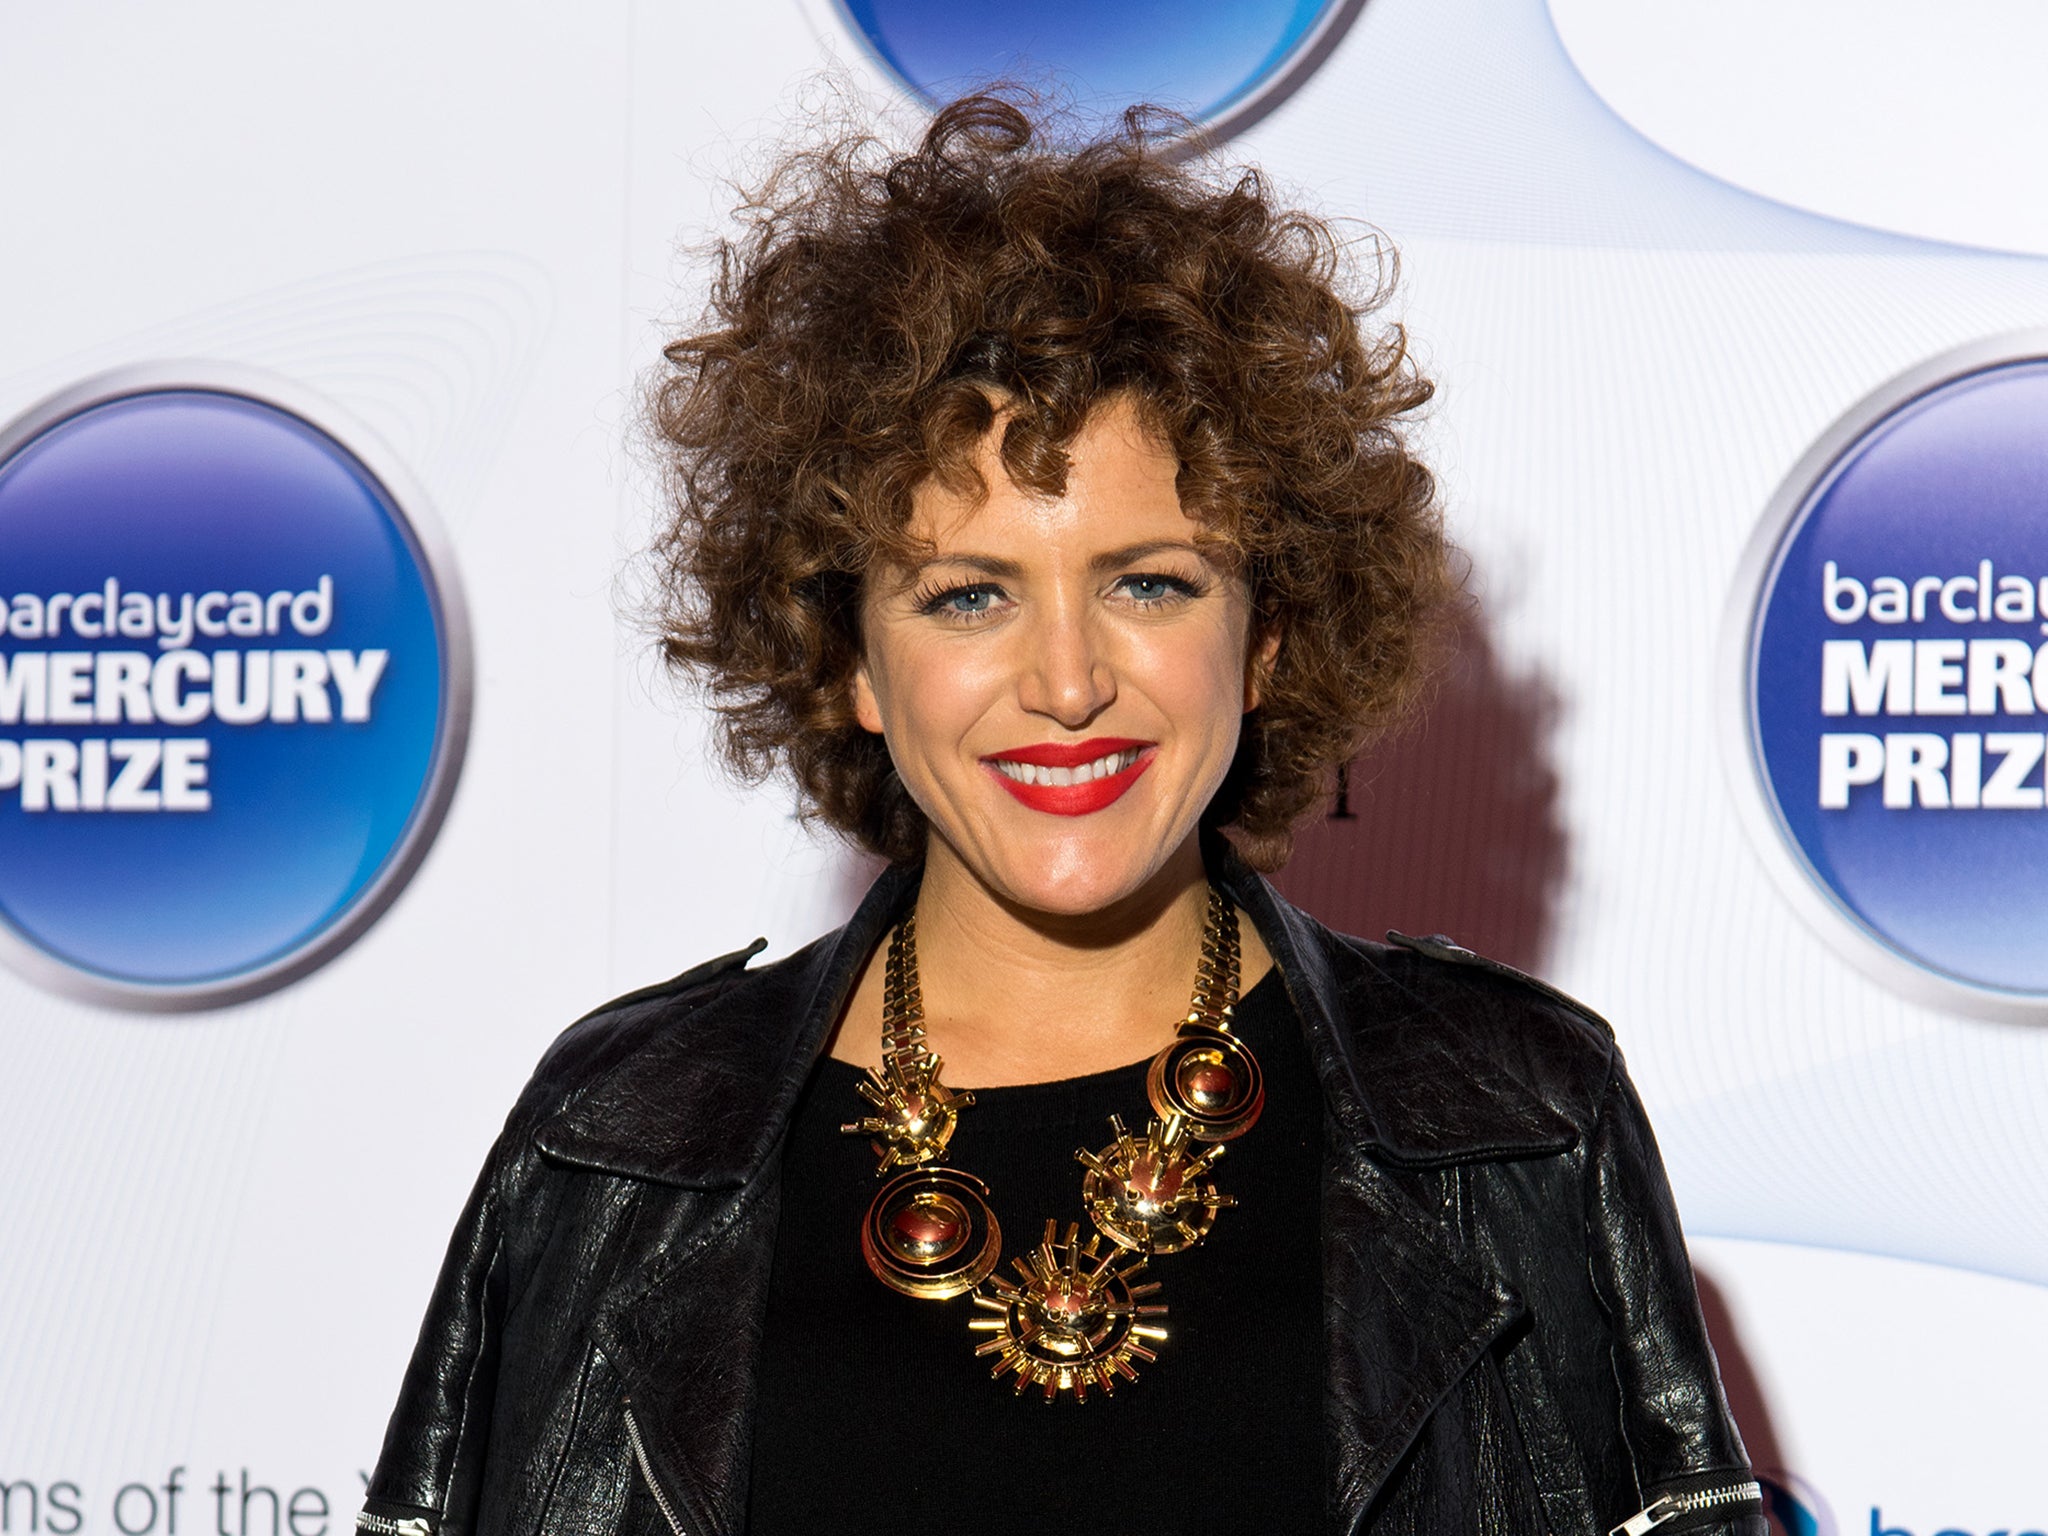 Annie Mac Adds 100 000 Listeners After Taking Over Zane